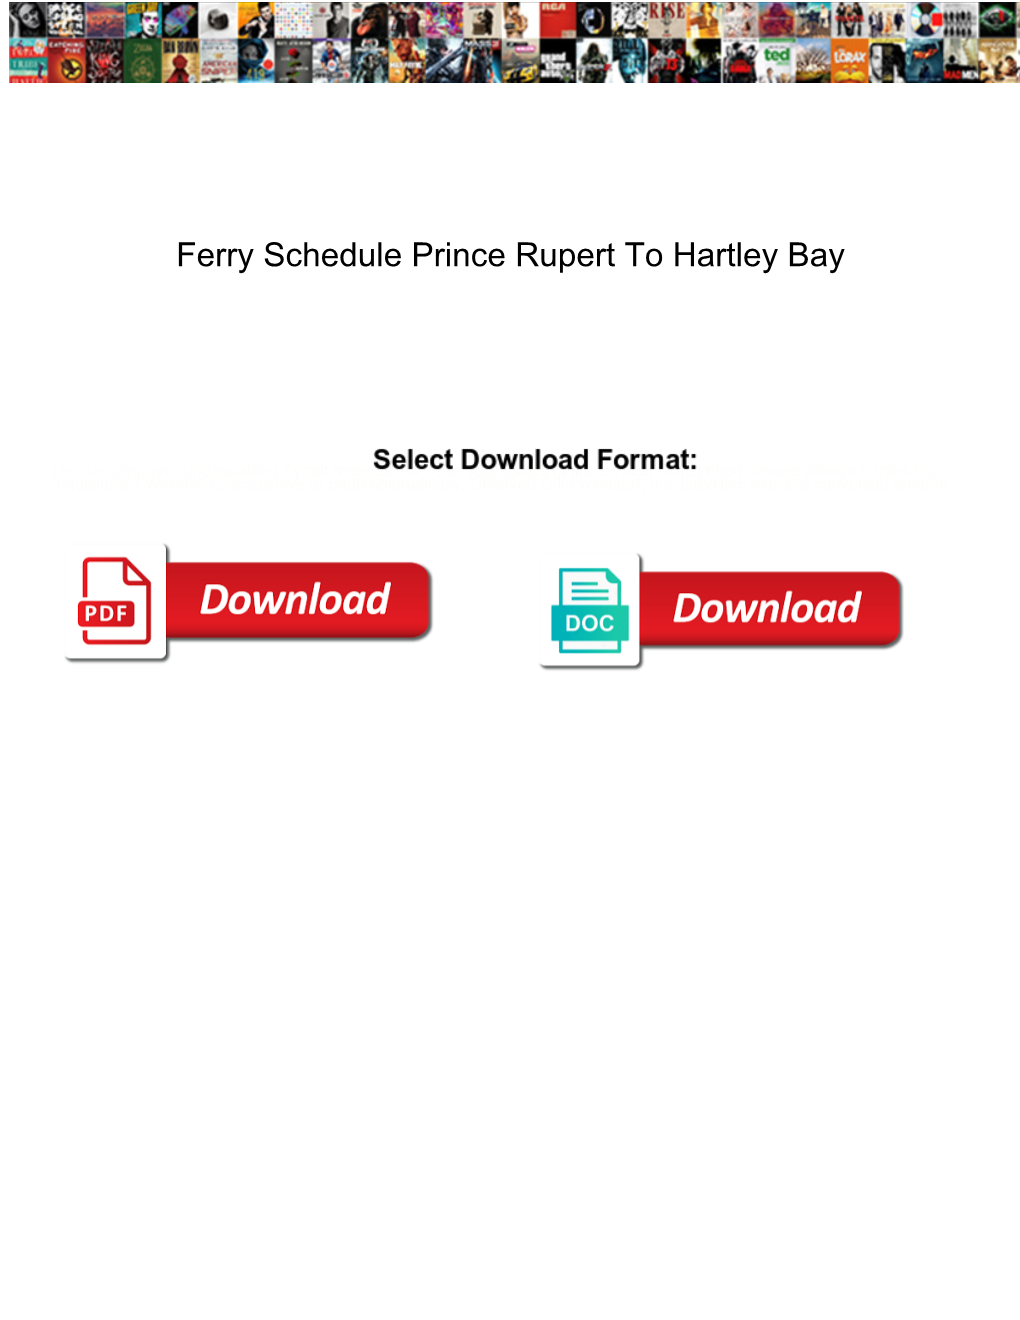 Ferry Schedule Prince Rupert to Hartley Bay